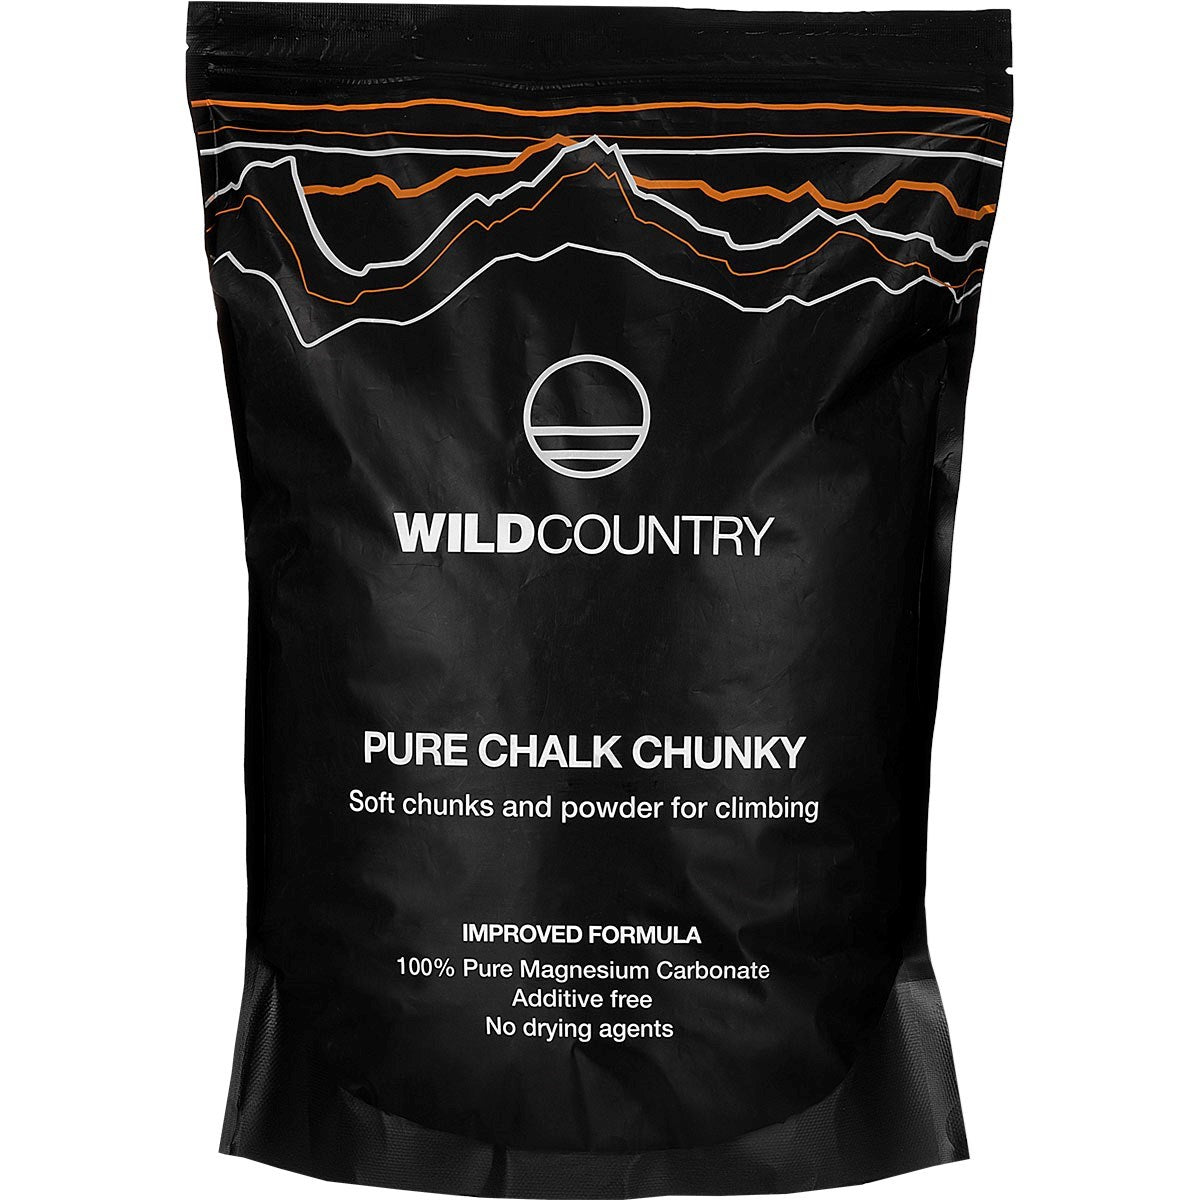 Wild Country Pure Chalk Chunky 1kg Bag